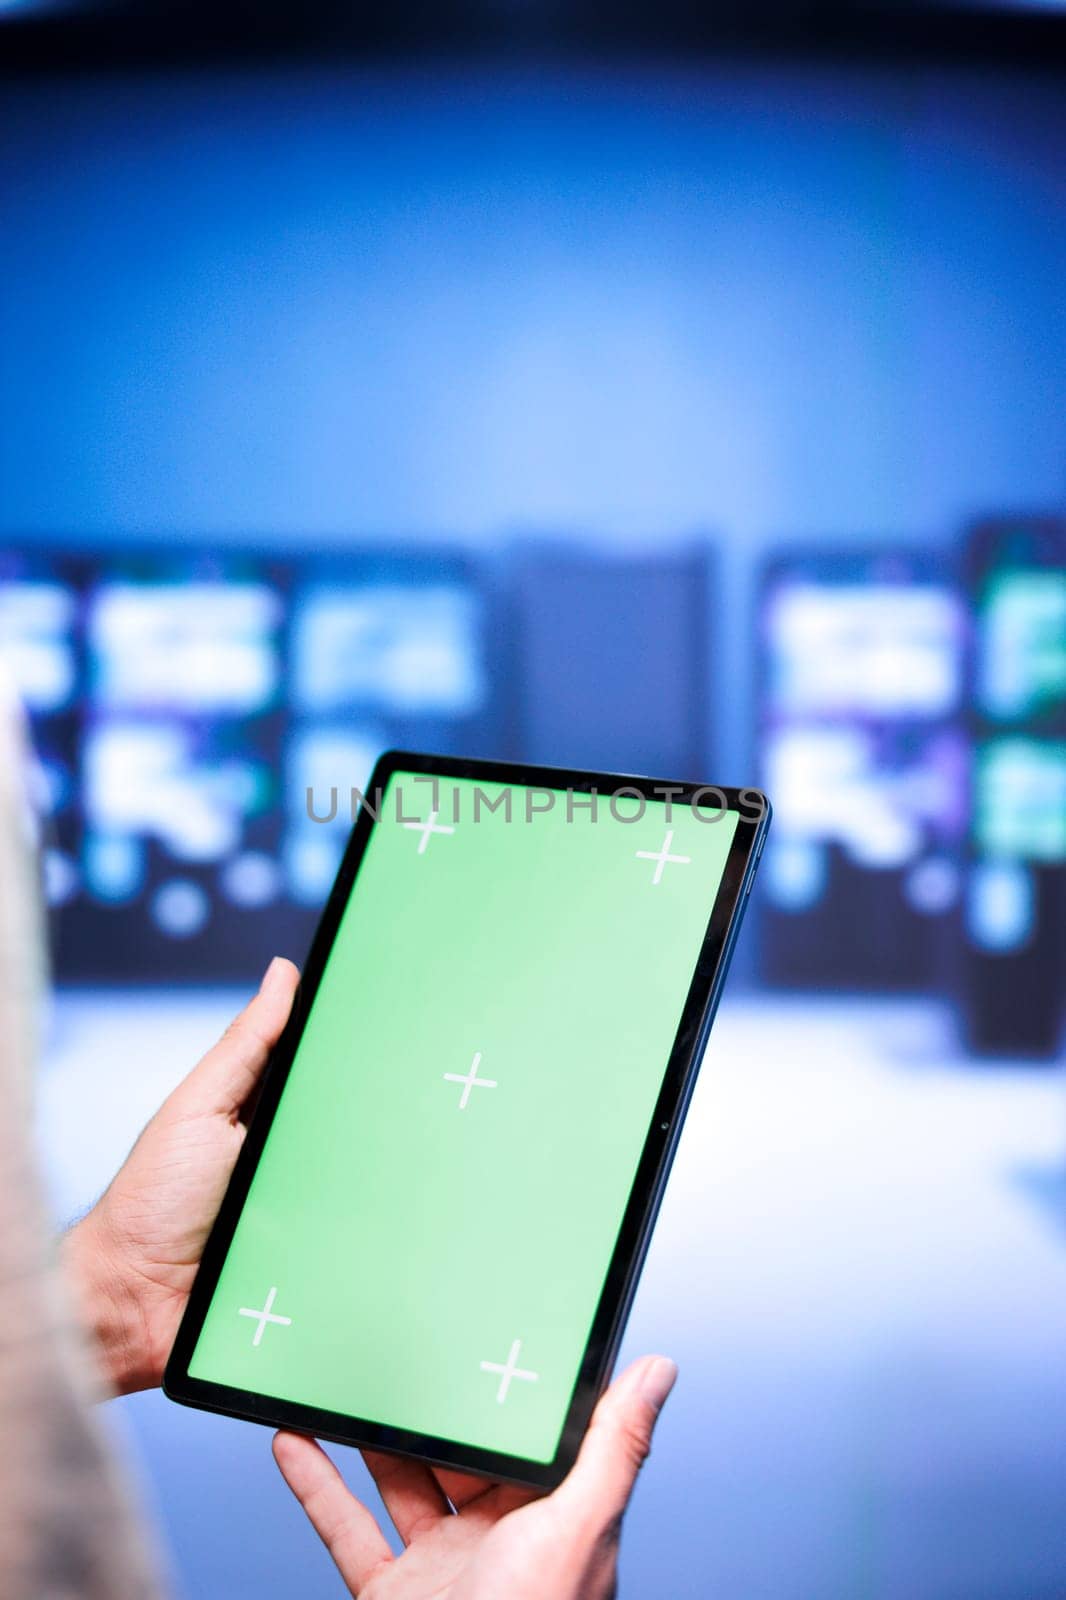 Technical support employee troubleshooting data center servers performance trends. Expert using chroma key tablet to spot high tech facility operational issues causing hardware to slow down